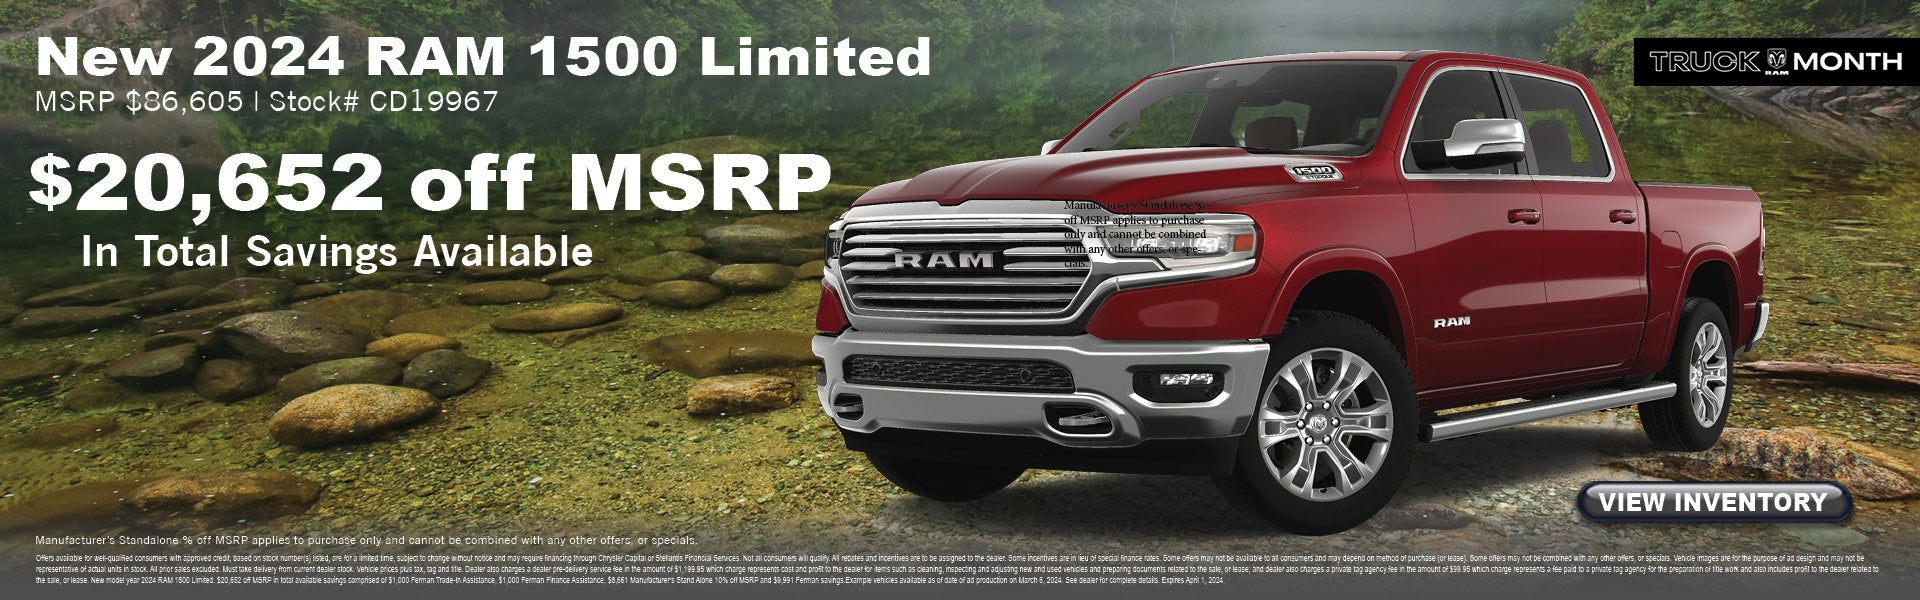 March Savings on New 2024 RAM 1500 Limited